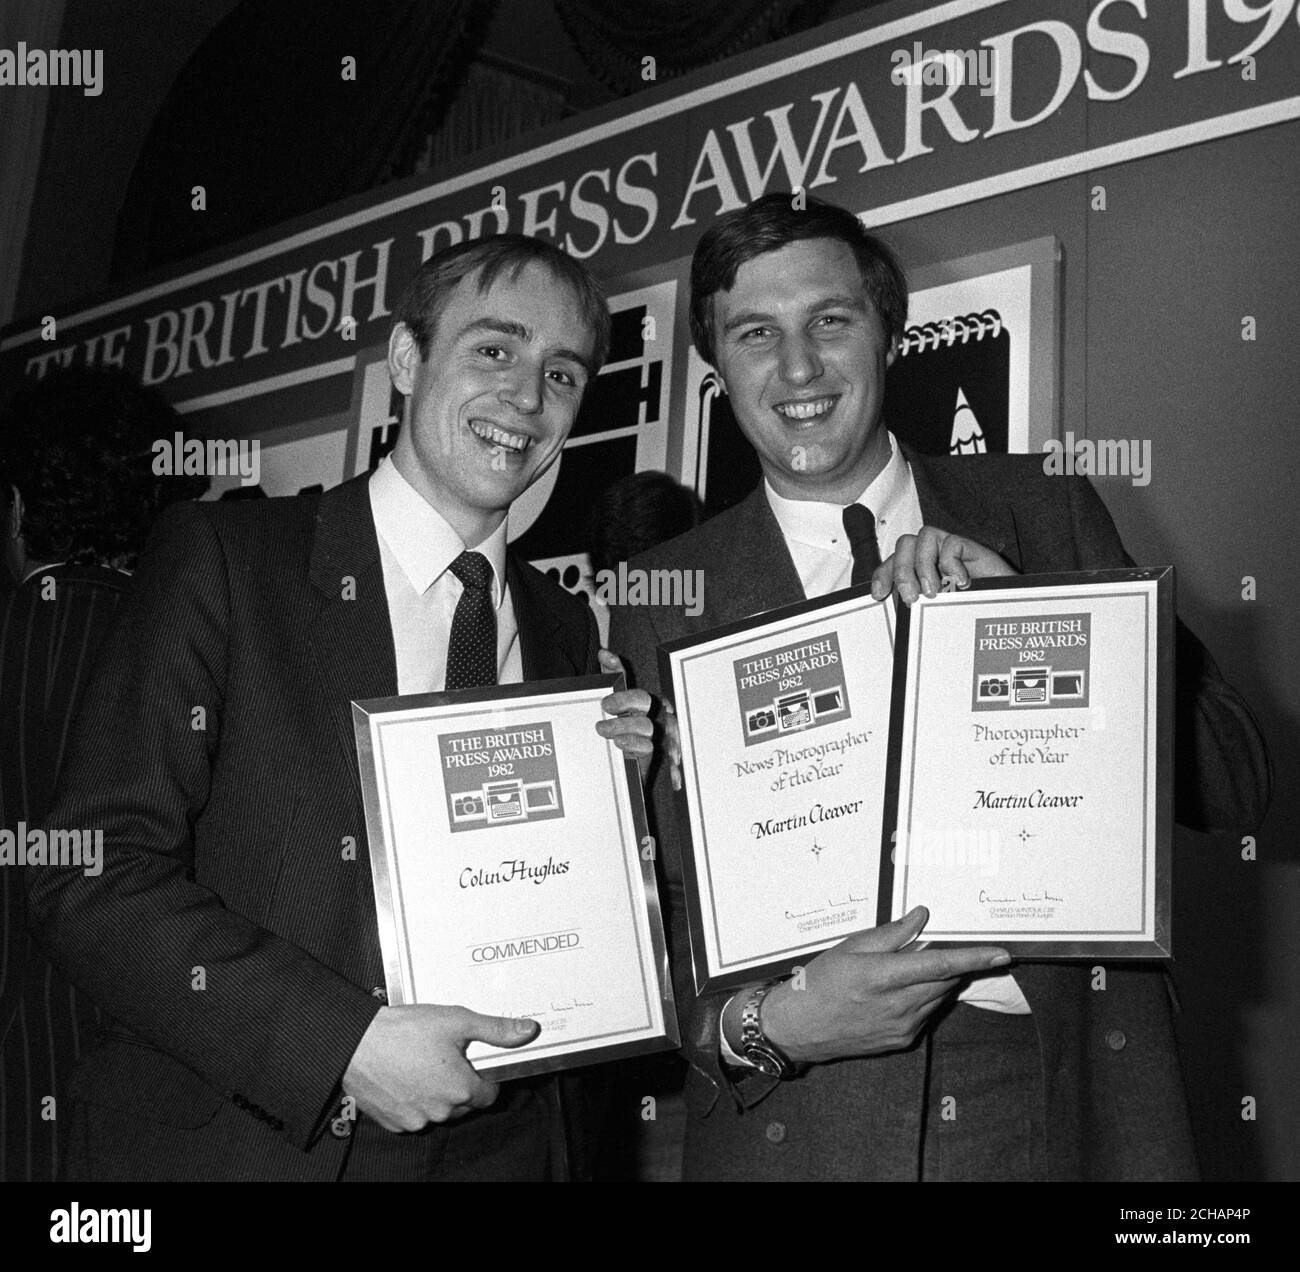 Press Association photographer Martin Cleaver (r) with his British Press Awards as Photographer and News Photographer of 1982, and Colin Hughes, who was commended in the Young Journalist of the Year category. Mr Cleaver received his awards, presented at the Savoy Hotel, London, for his coverage of the Falklands War. Mr Hughes, lately of the Sheffield Star, has just recently joined the Press Association. Stock Photo